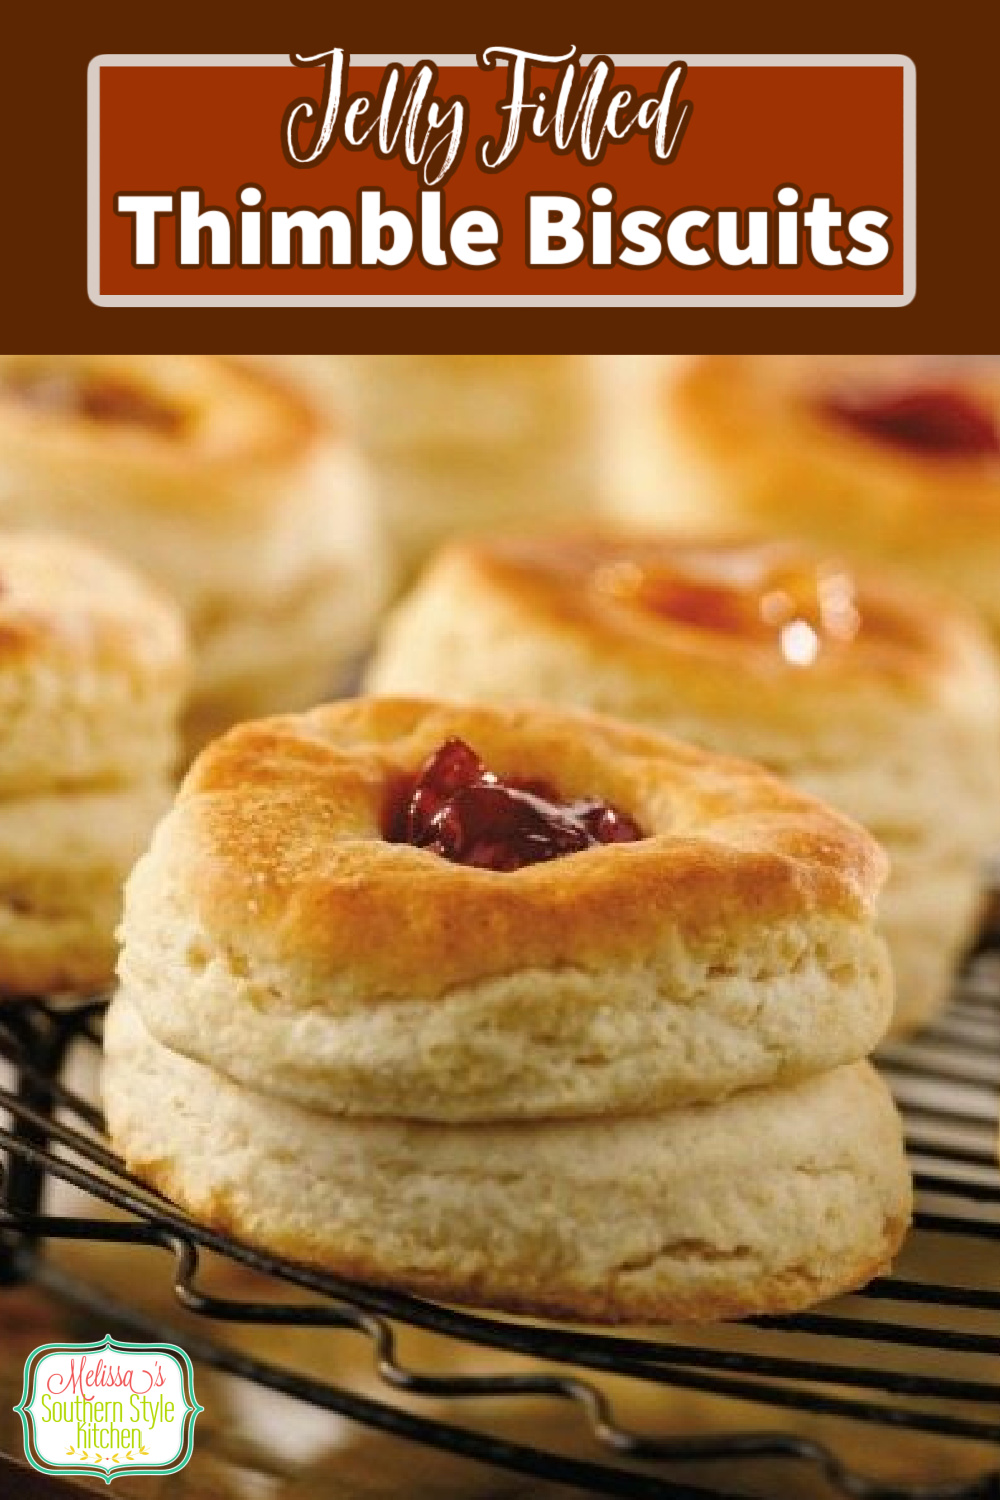 Thimble biscuits are buttermilk biscuits, filled with your favorite flavor of jam. It's a fun way to shake-up the house bread of the South. #thimblebiscuits #buttermilkbiscuits #jambiscuits #biscuitrecipes #southernbiscuits #brunch #breakfast #holidaybrunch #southernfood #southernrecipes via @melissasssk